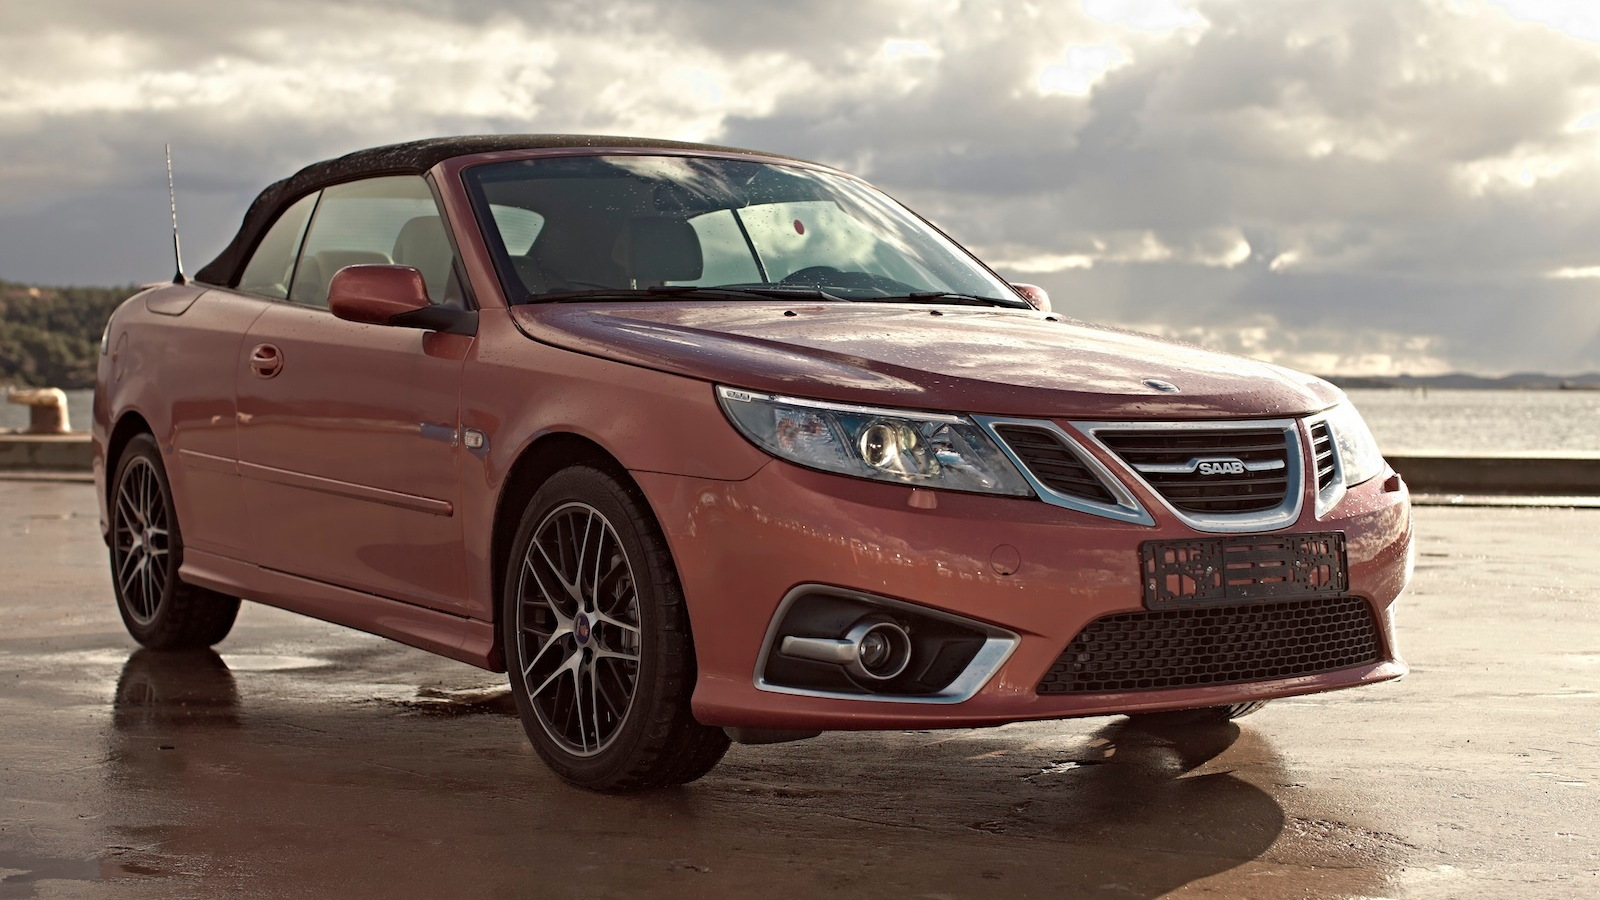 Saab 9-3 Cabriolet Independence Edition - image: KVD Auctions